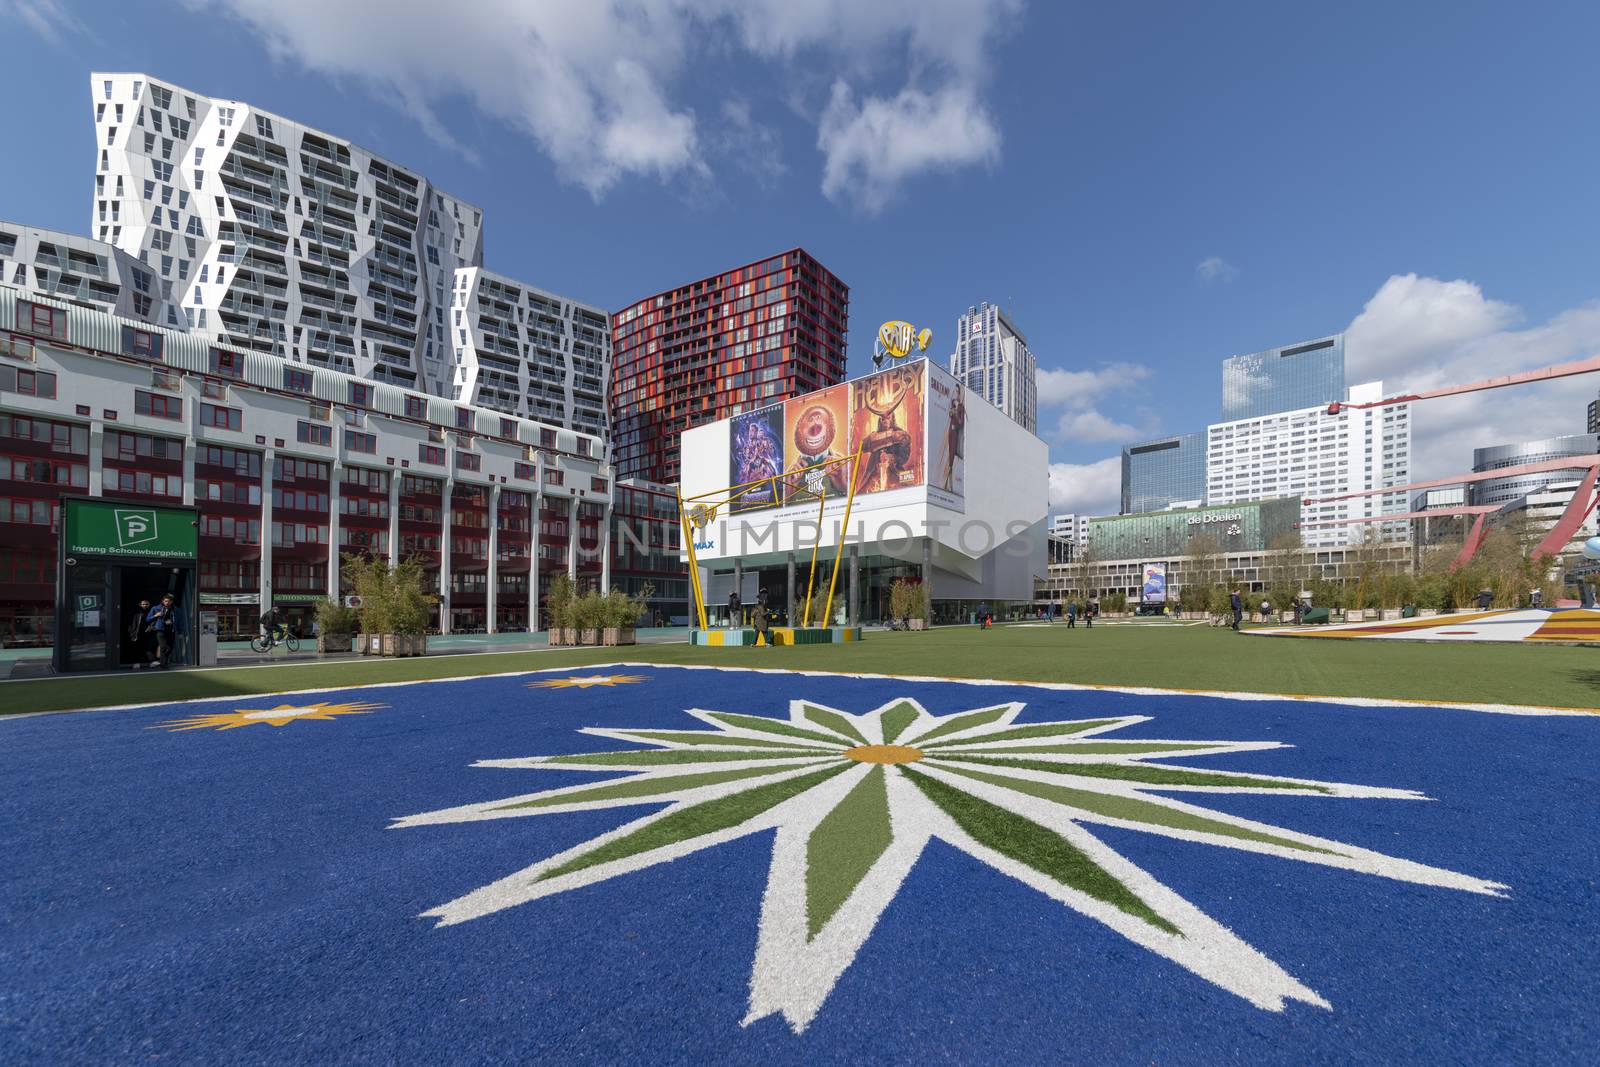 ROTTERDAM, 13 April 2019 - Central place of the cinema building in Rotterdam with the ground decorated with face colored grass depicting a twelve branched star